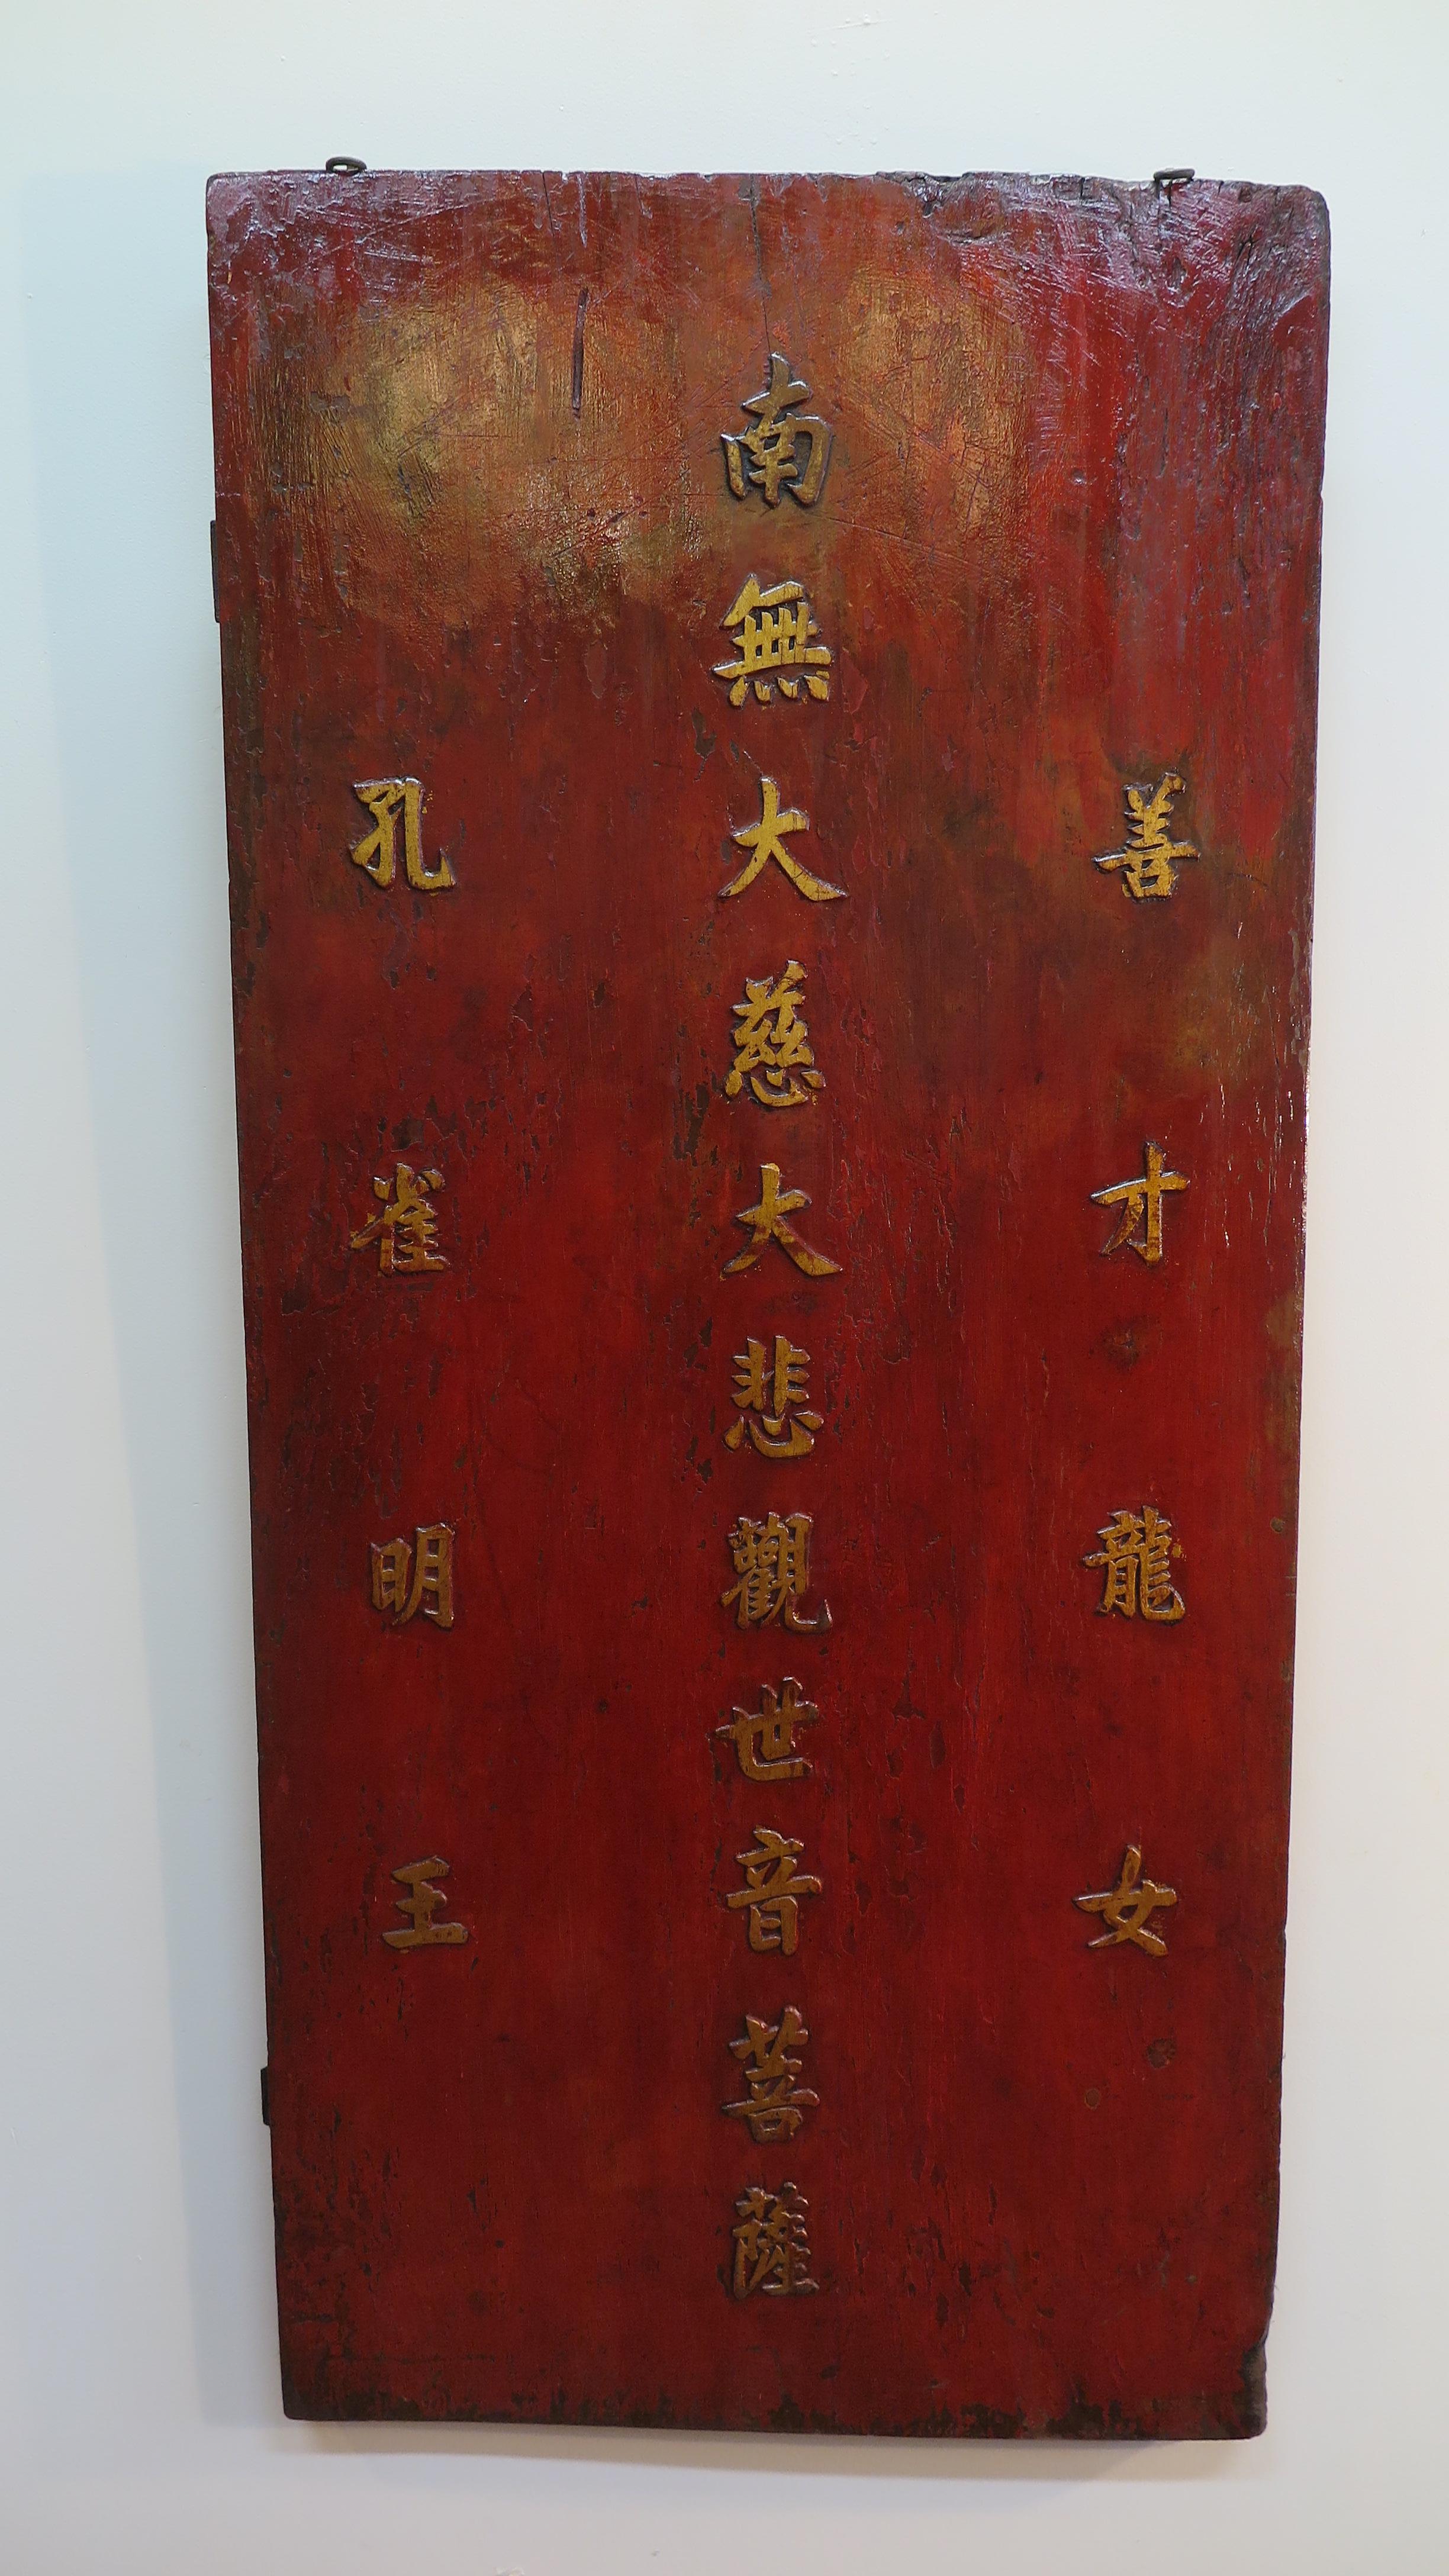 Rare 19th century Buddhist Taoist Prayer Board.  Beautifully carved gilded calligraphy prayer board blessing.  This is a singular solid board of wood.  
A very special and sacred blessing has been carved not into the wooden board but out of the